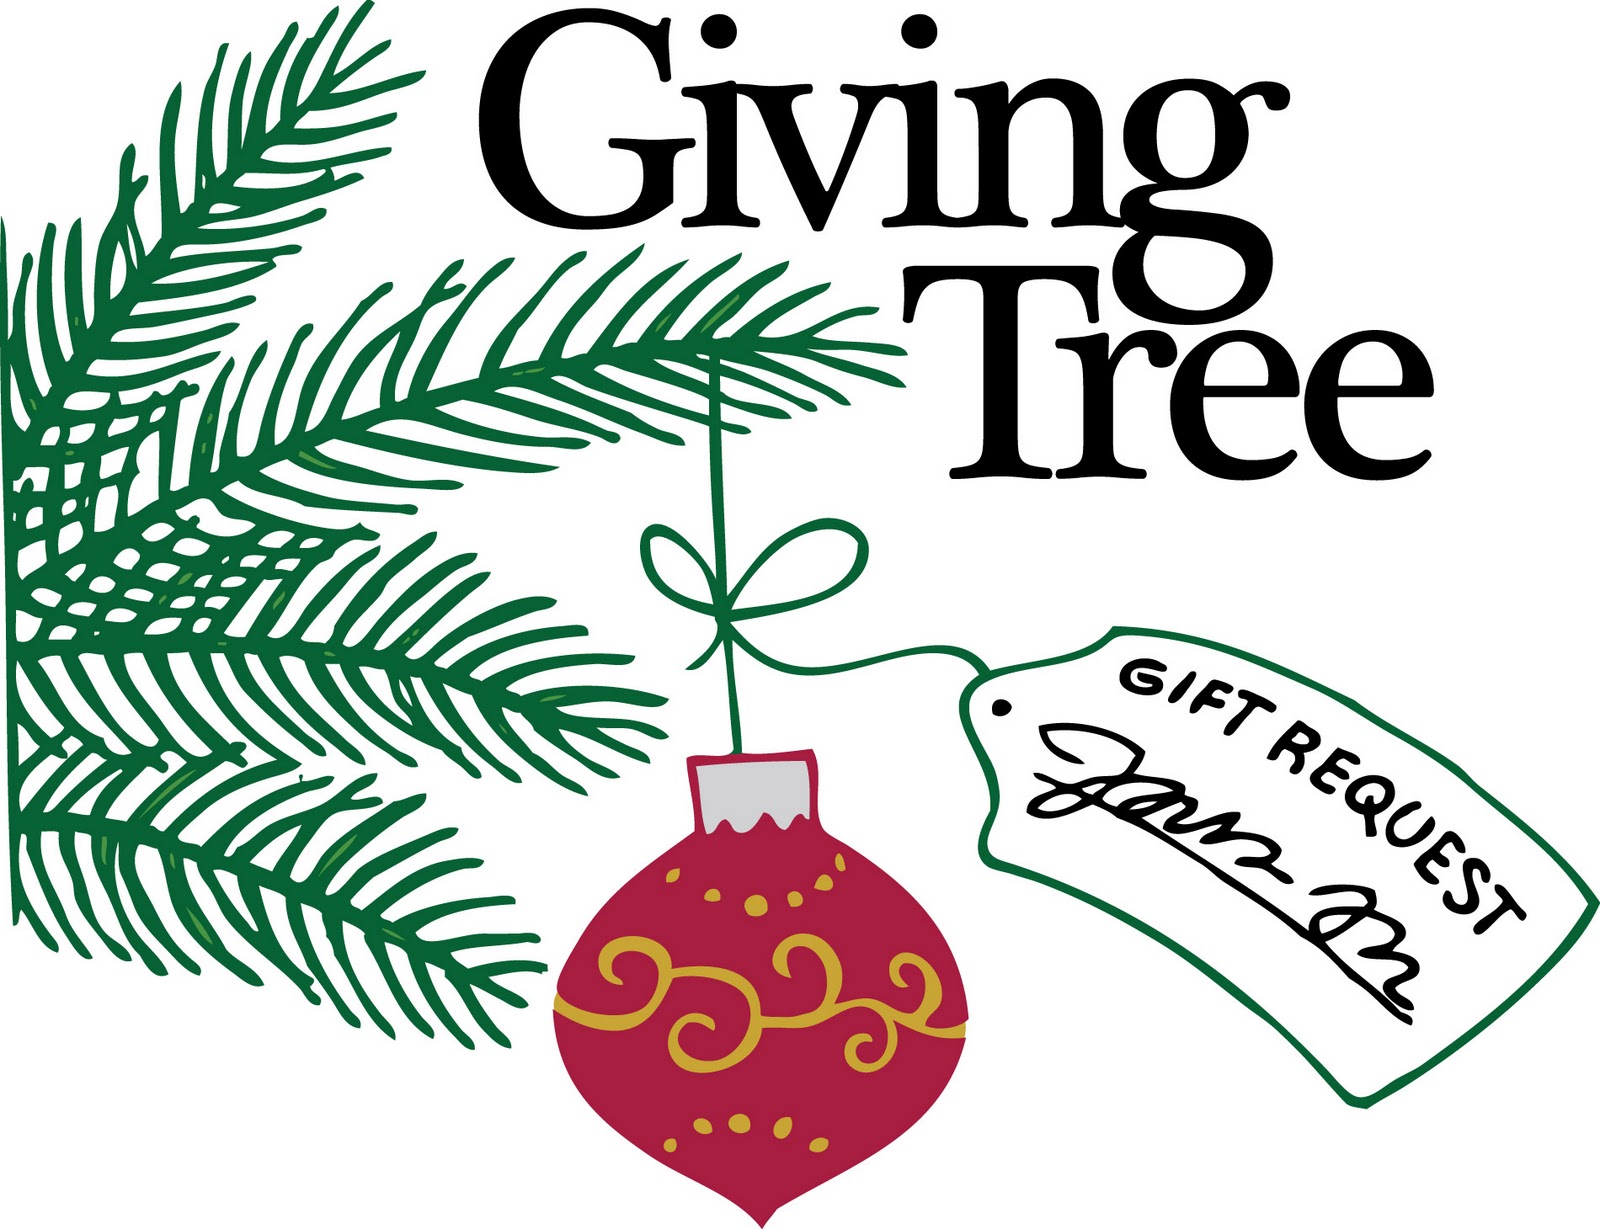 Angel tree clipart for giving tree